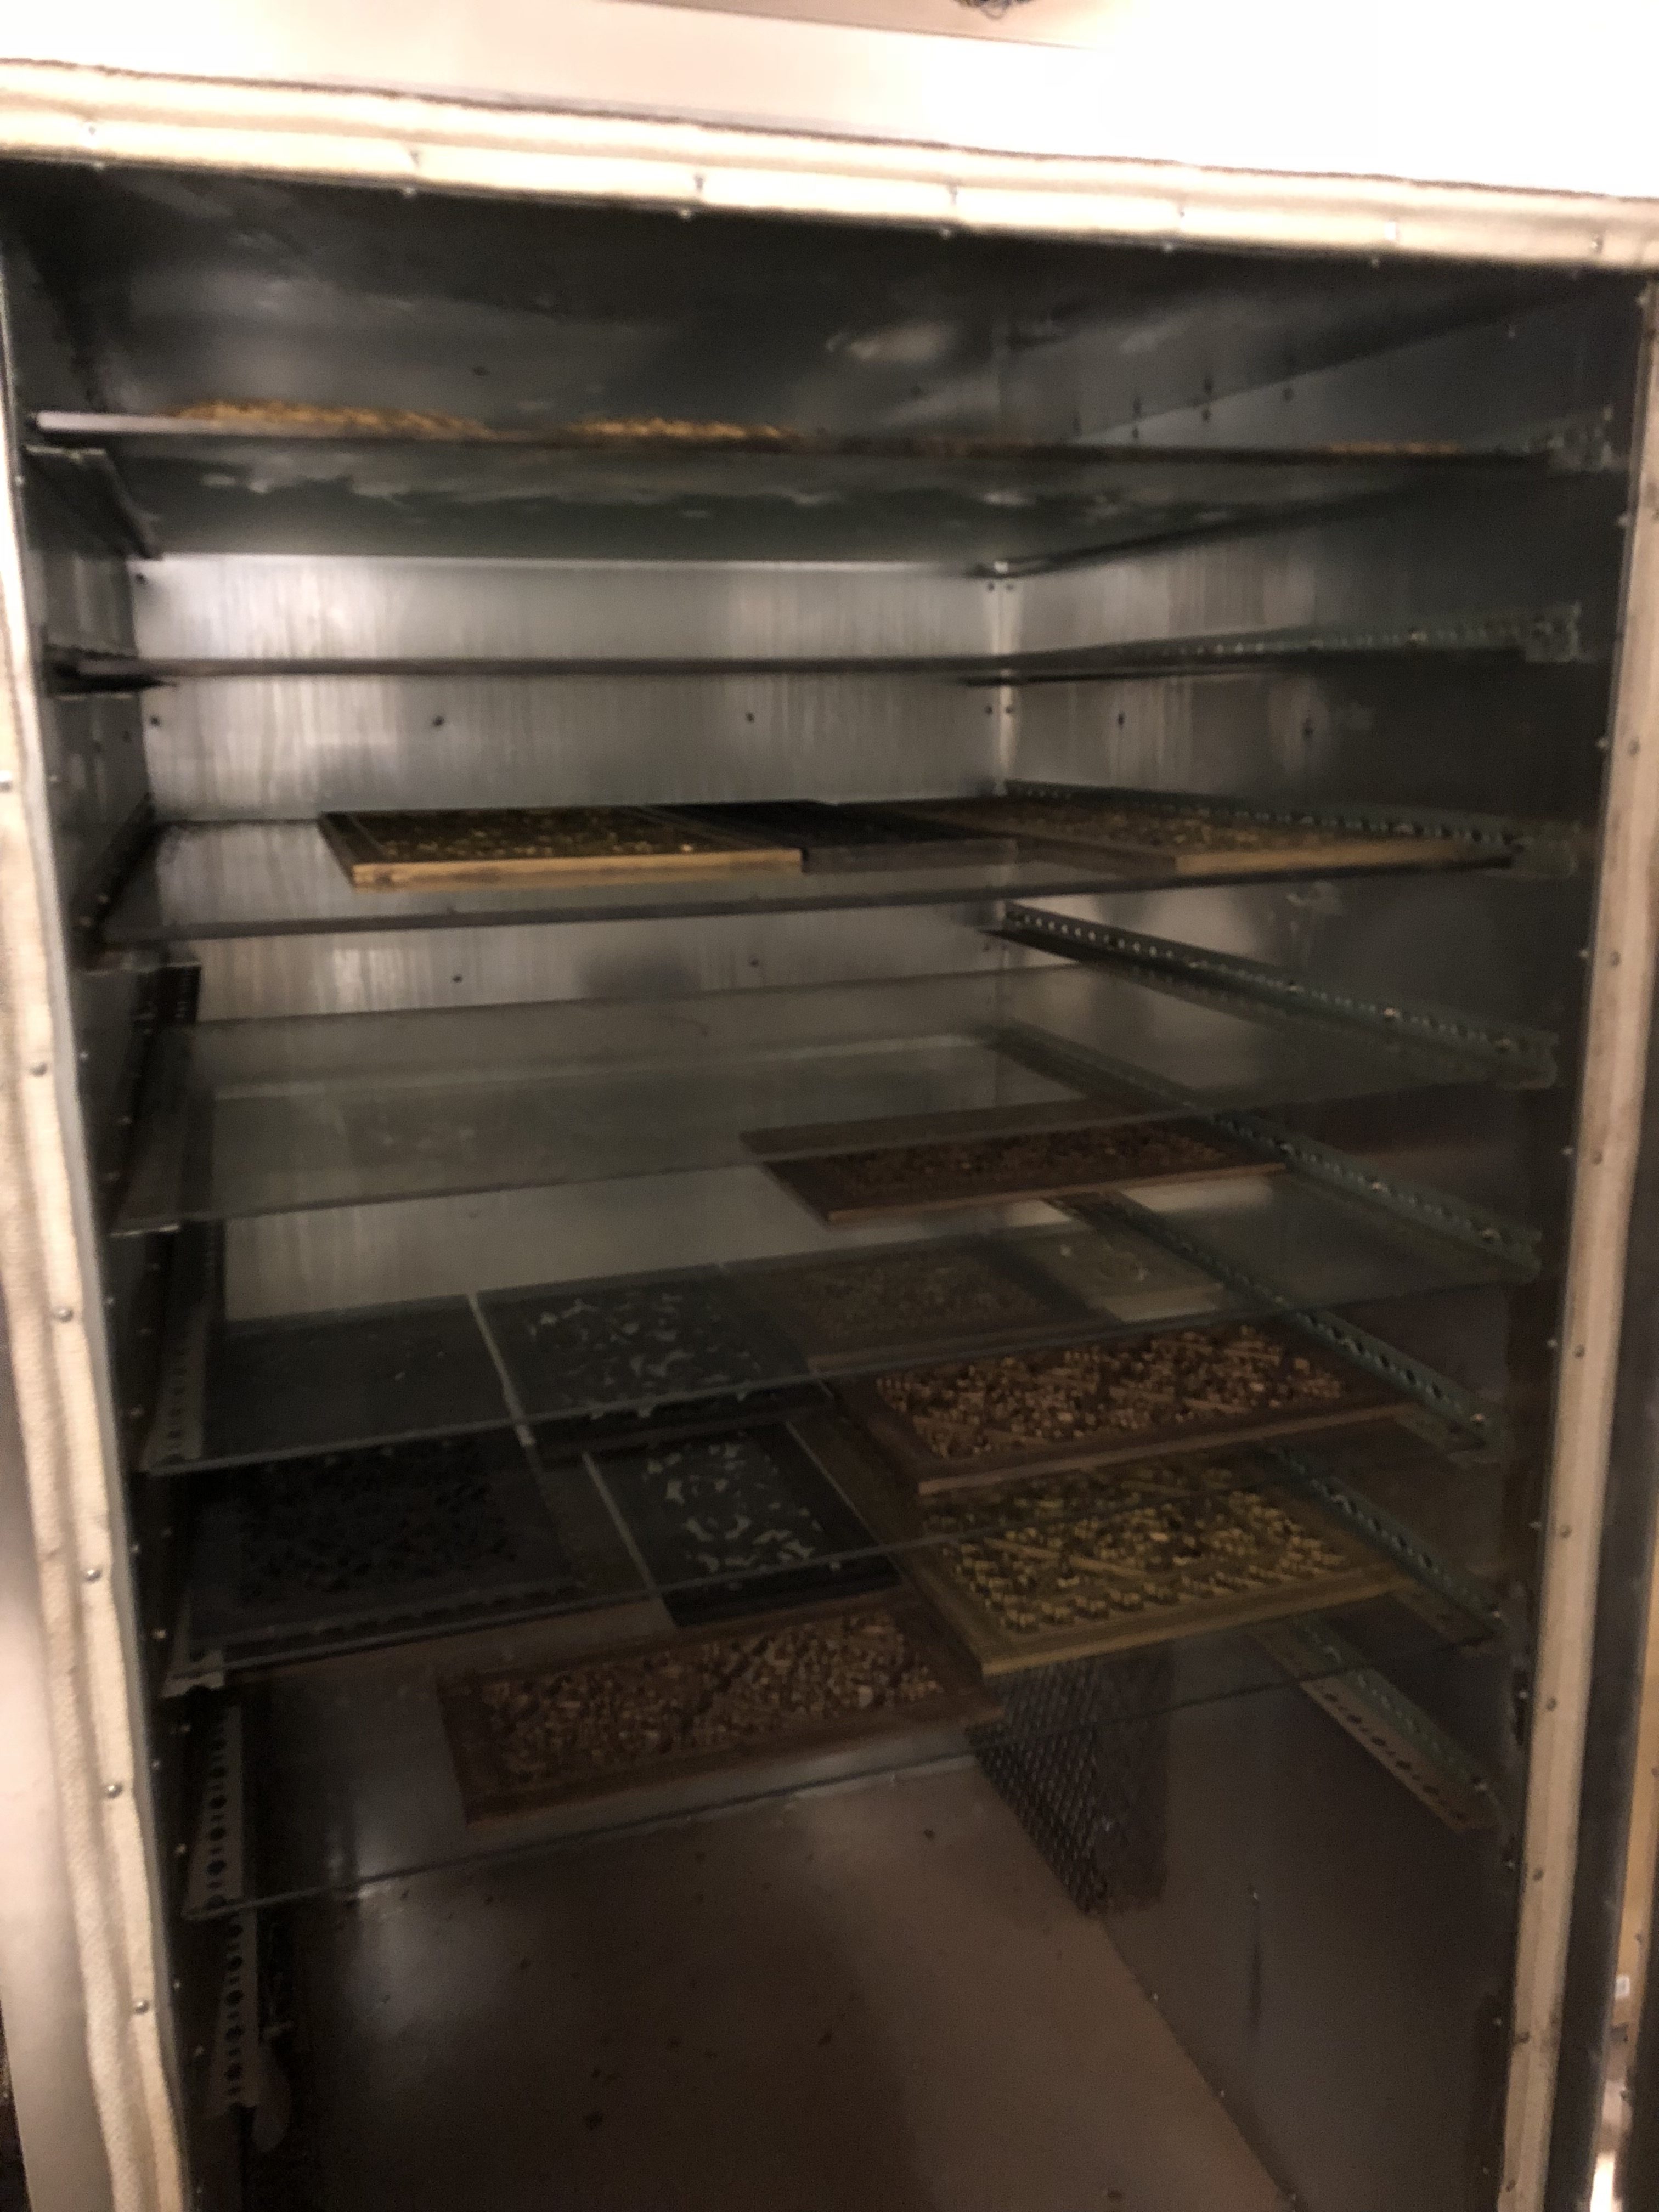 curing oven with tempered glass shelves